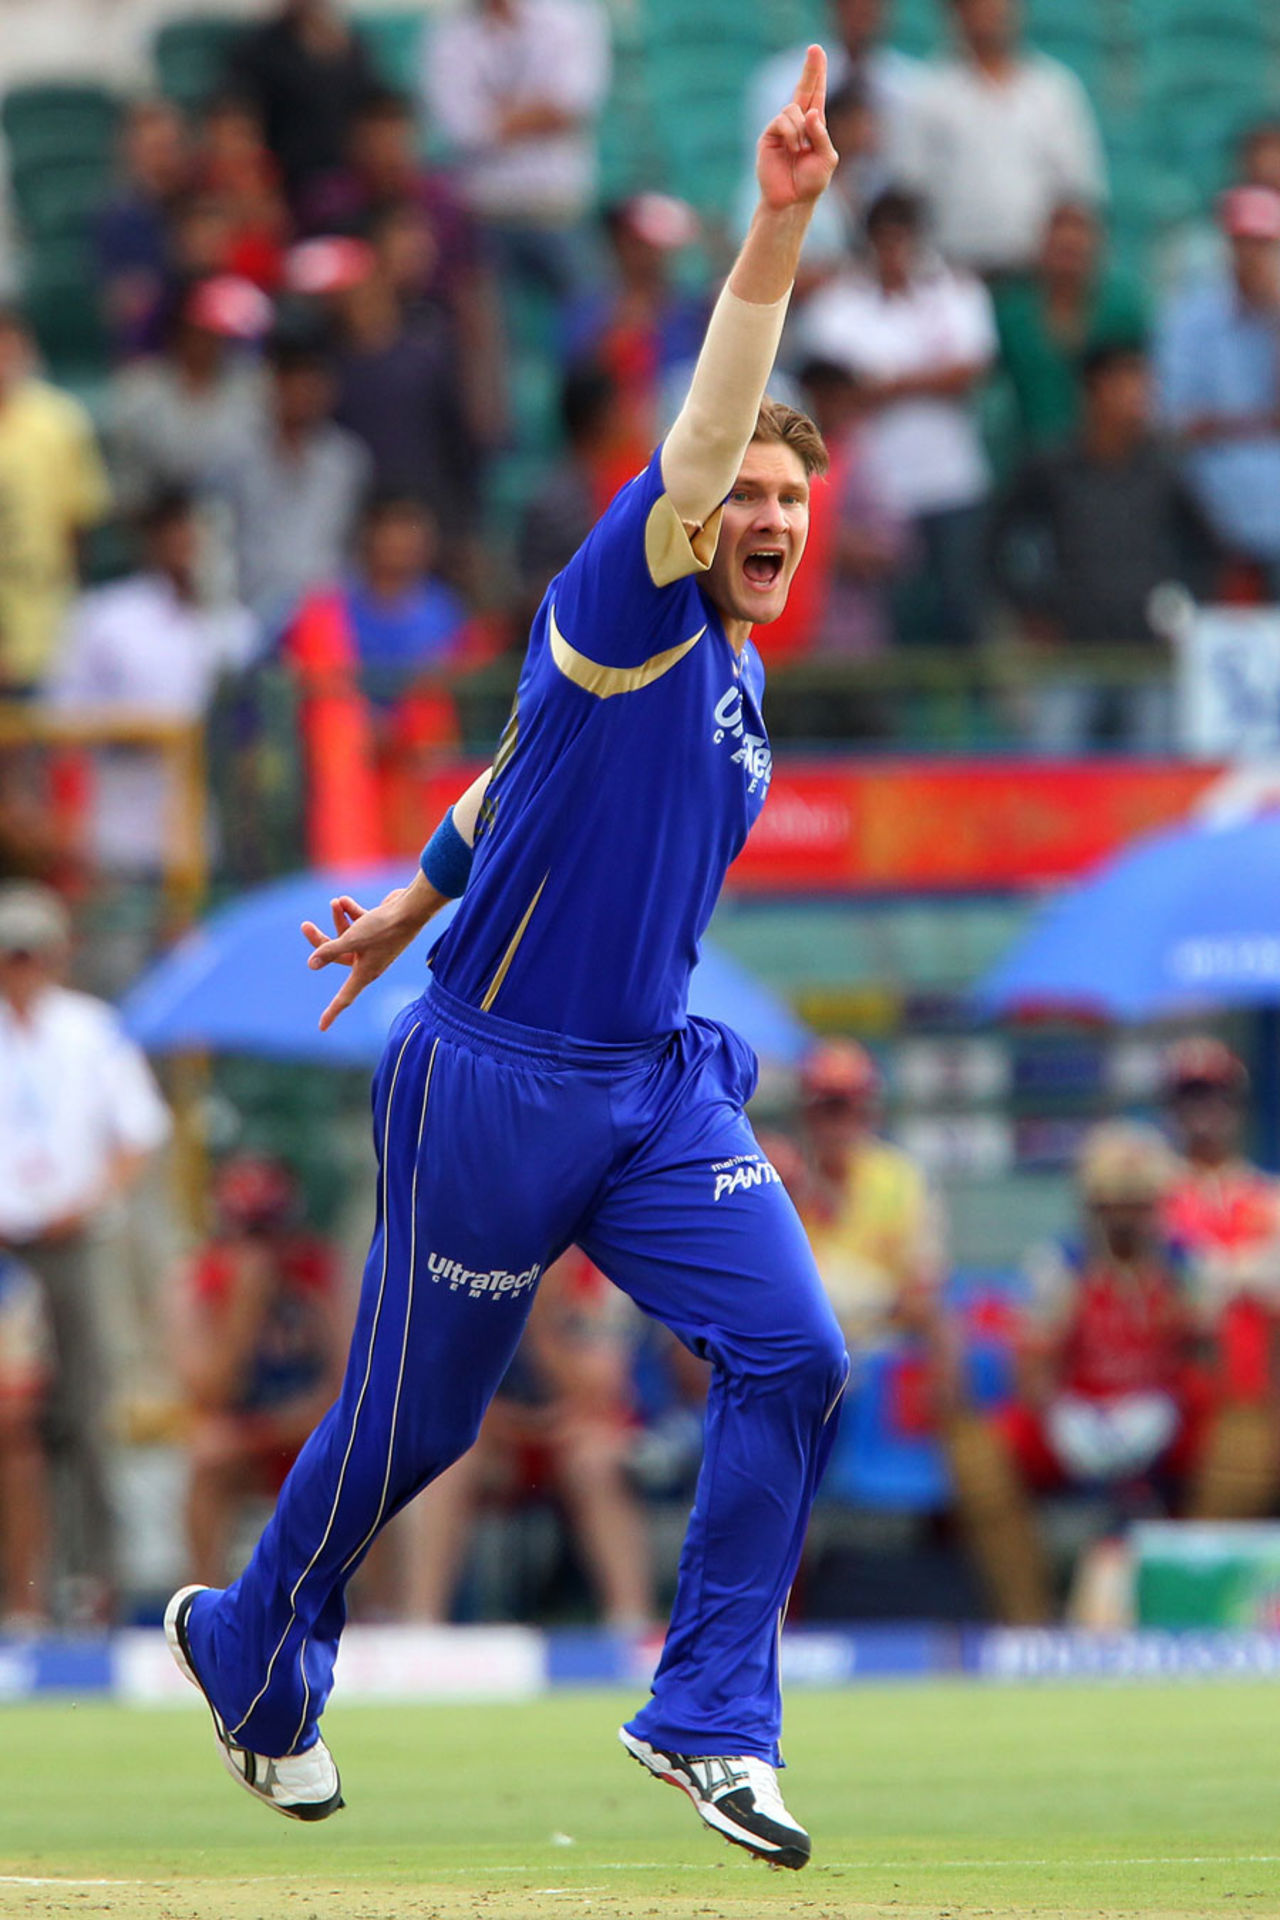 Shane Watson picked up three wickets for 22 runs off his four overs, Rajasthan Royals v Royal Challengers Bangalore, IPL 2013, Jaipur, April 29, 2013